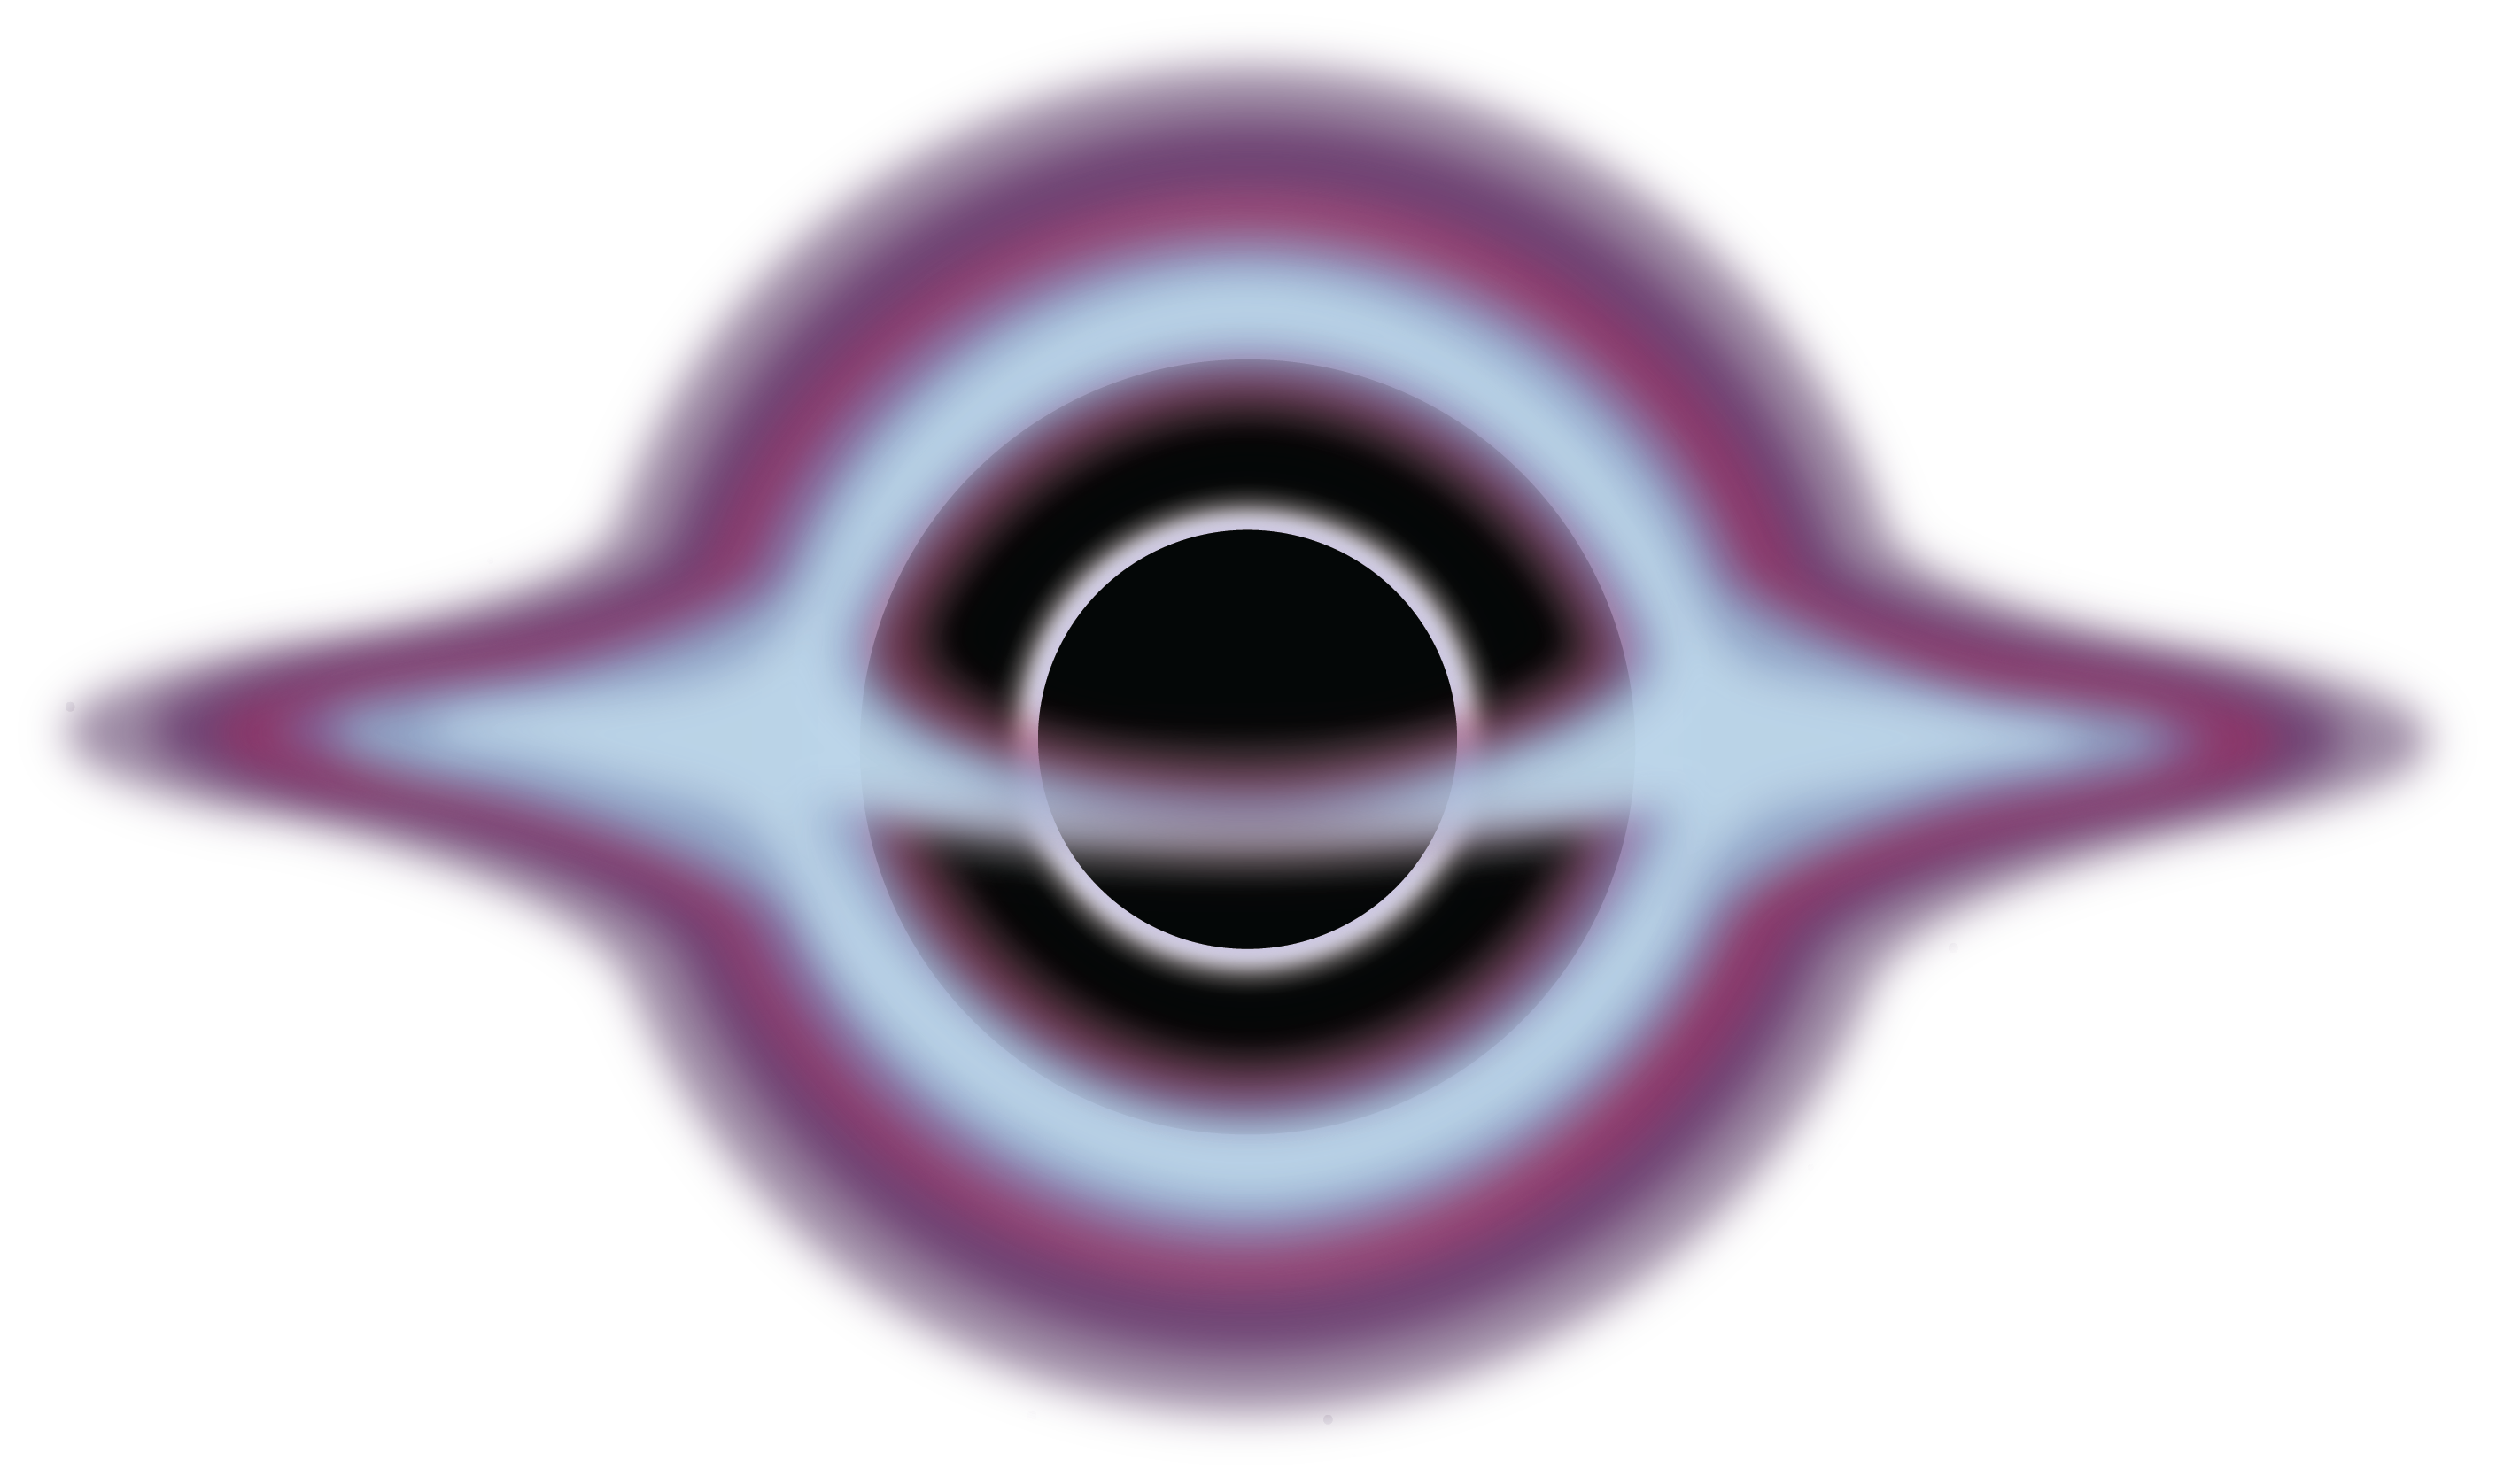 A graphic shows a central black circle outlined in white. This circle is surrounded by a black ring which is surrounded by a light blue ring which then fades outward into bright and then dark and diffuse purple. Across the middle of the image is a light blue line that gives the appearance of a ring around the circular object.